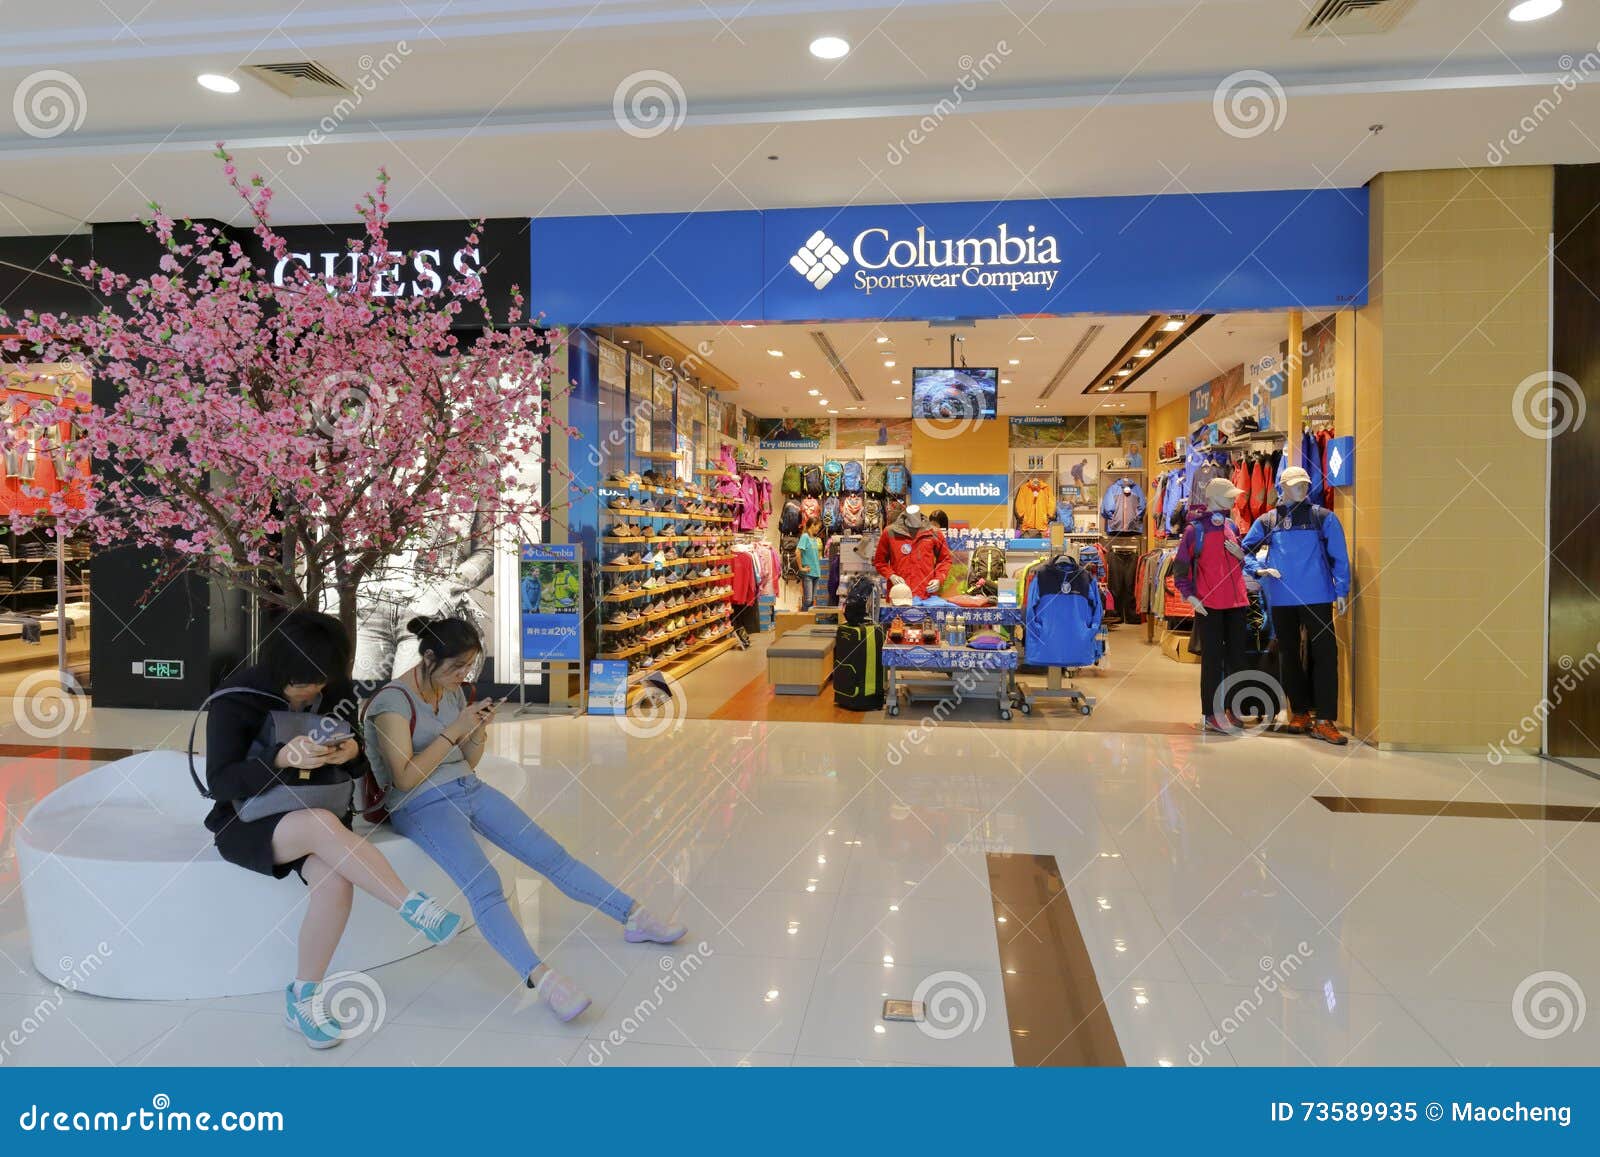 The Famous Columbia Clothing Shop Editorial Image - Image of city, pants:  73589935